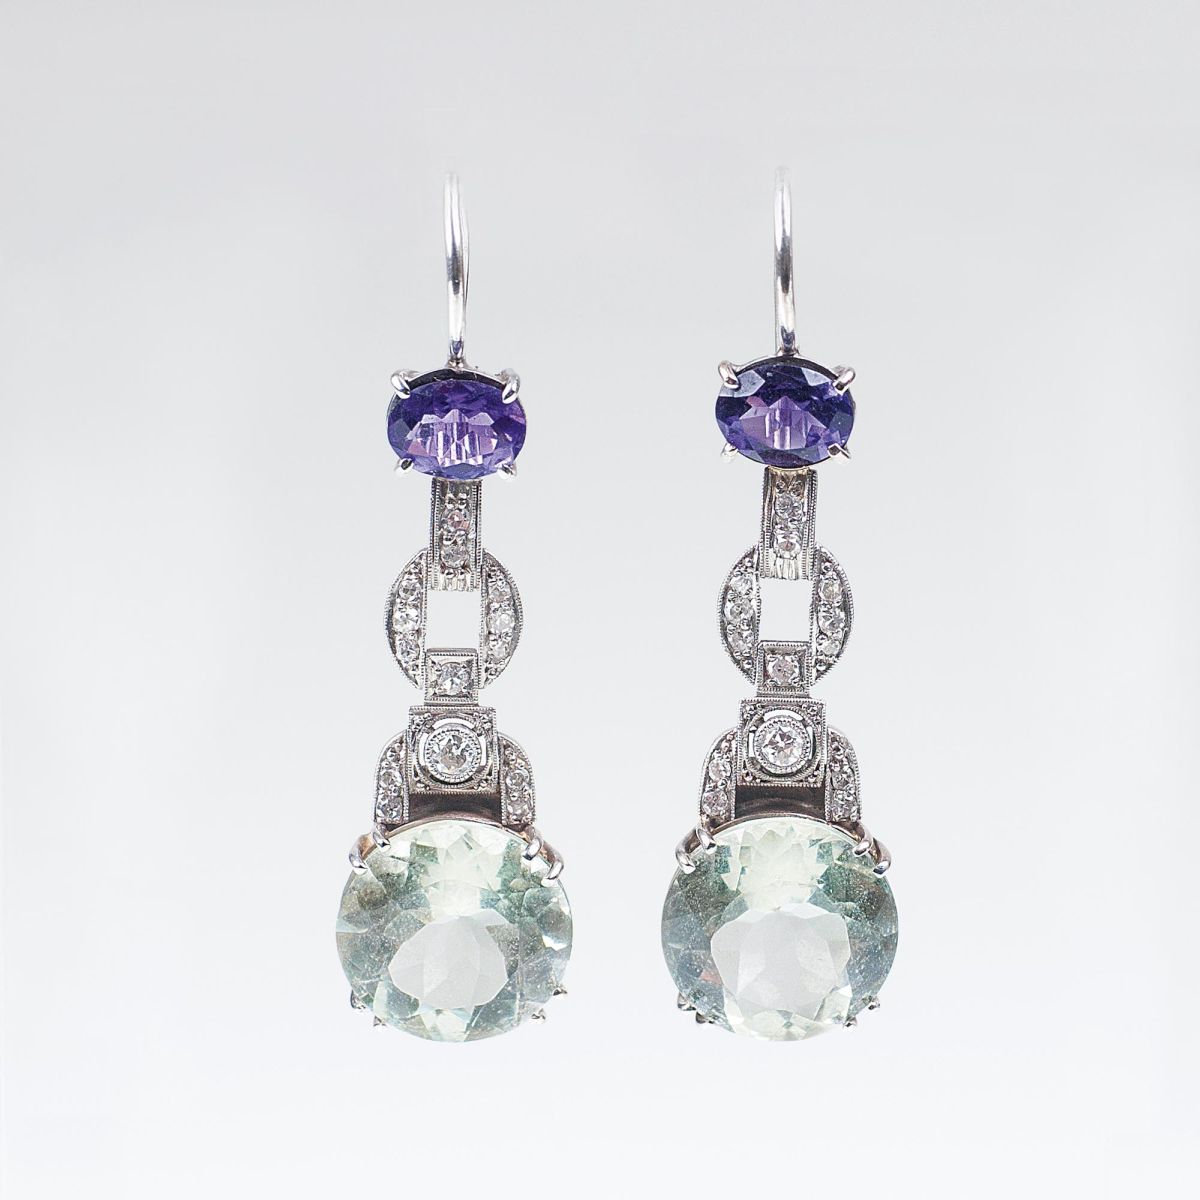 A Pair of Prasiolith Amethyst Earpendants in Art-déco Style